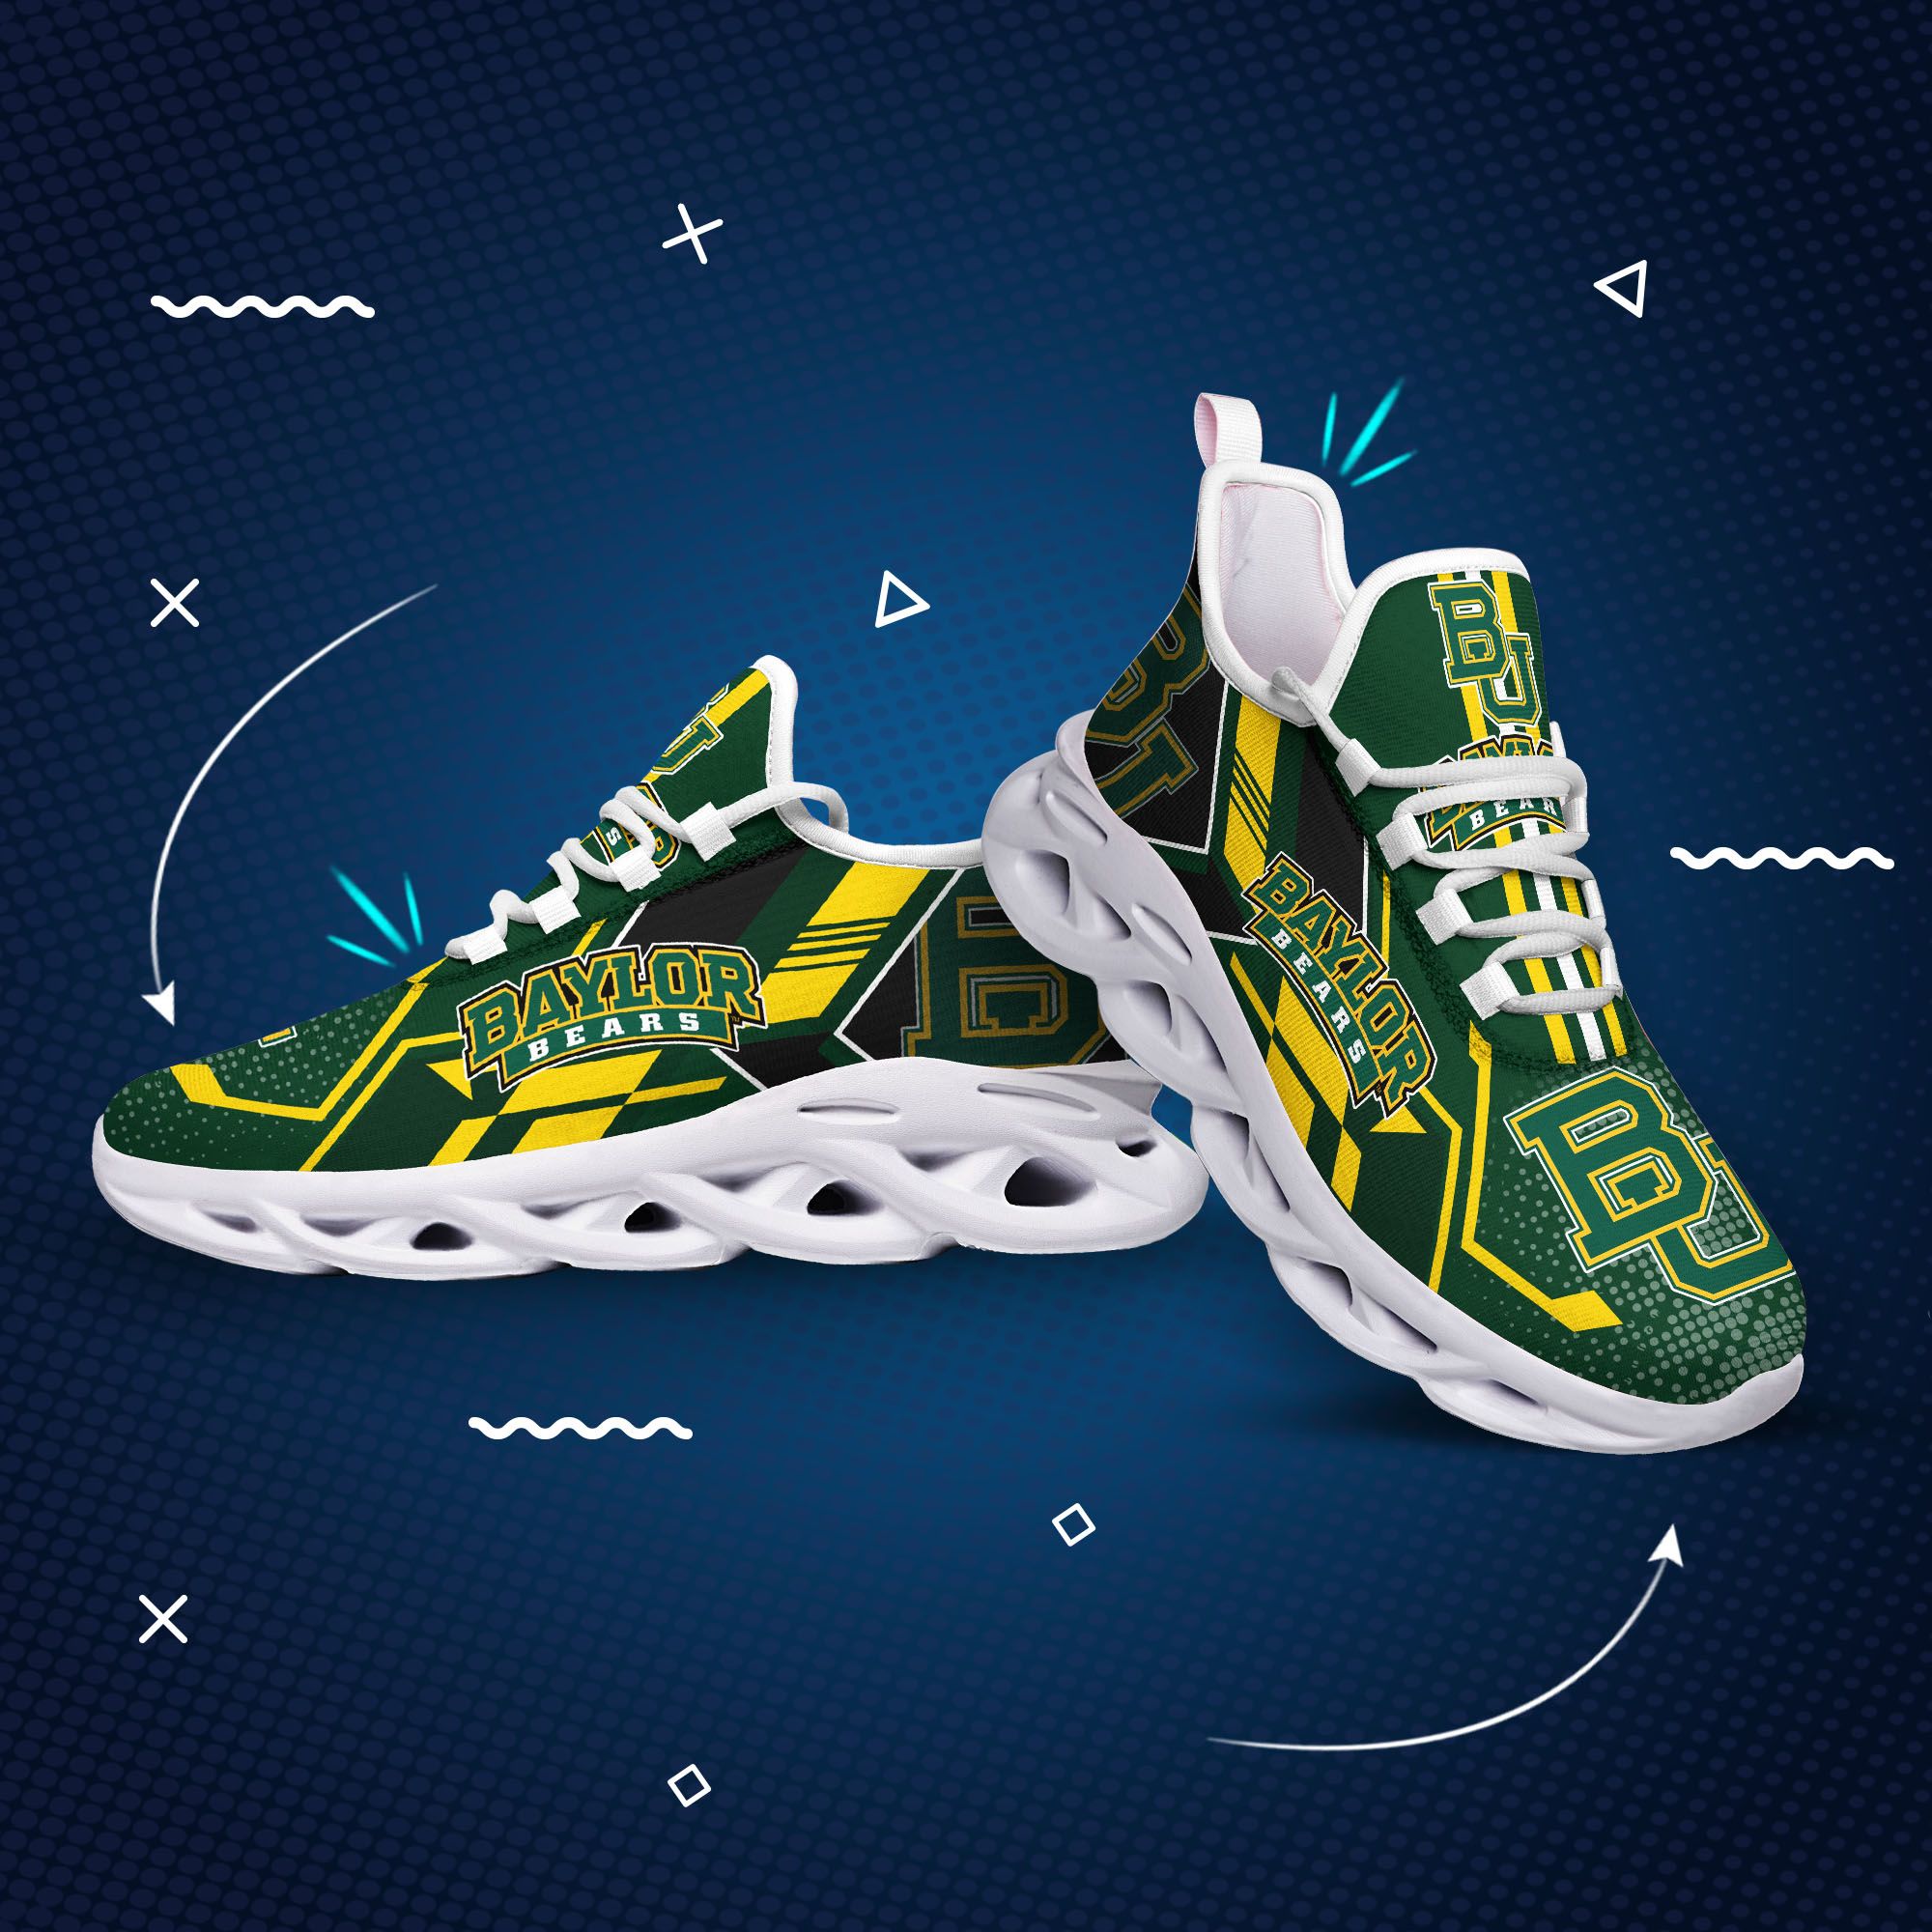 Baylor bears max soul clunky shoes1